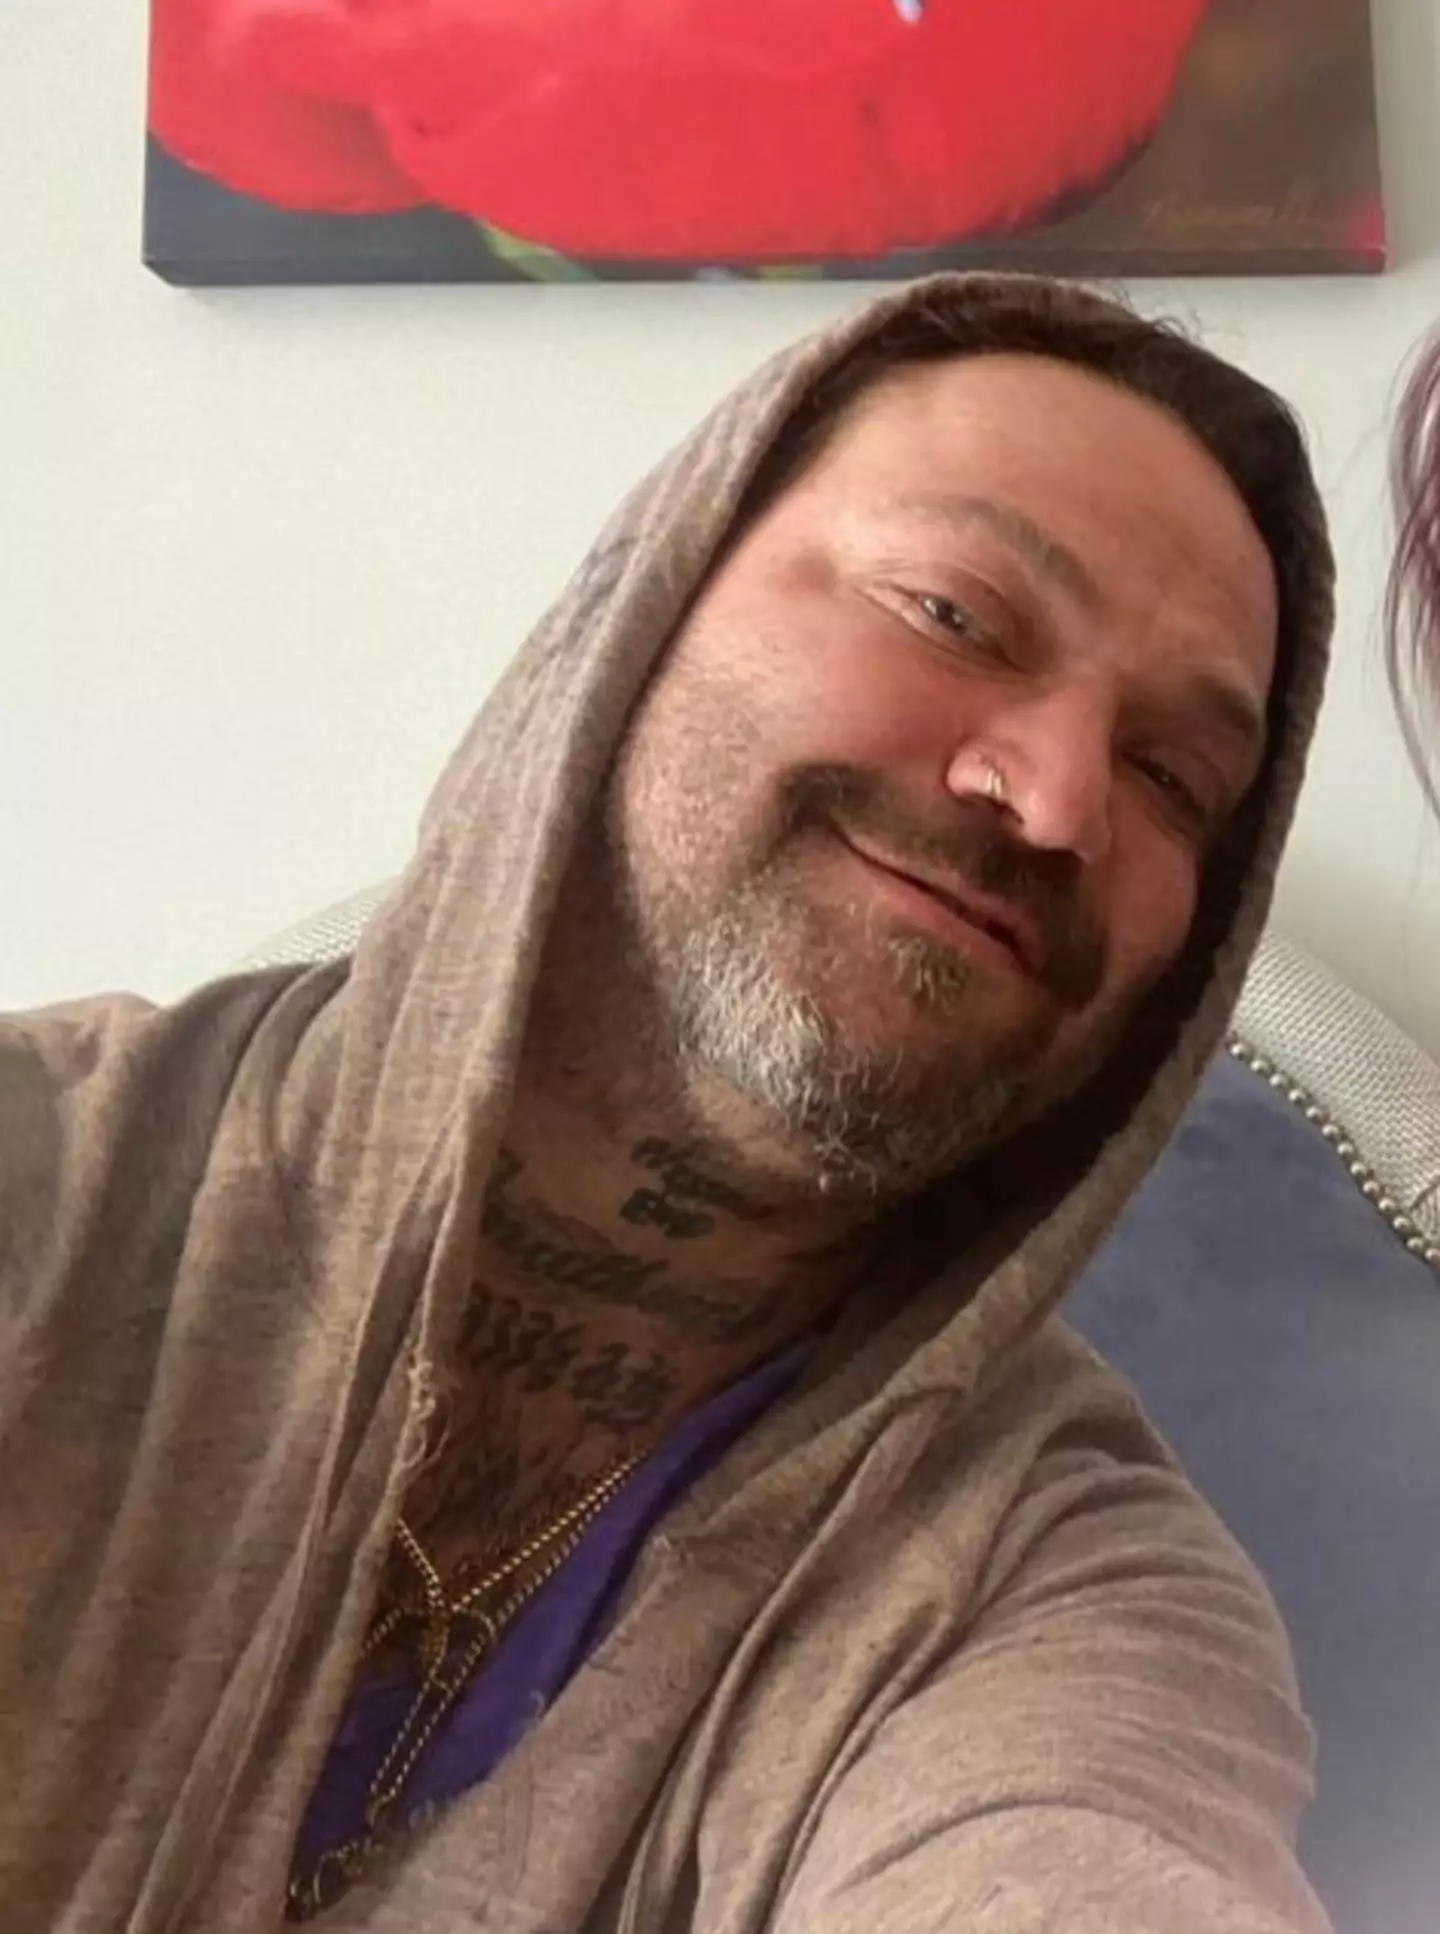 Bam Margera allegedly attacked his brother.